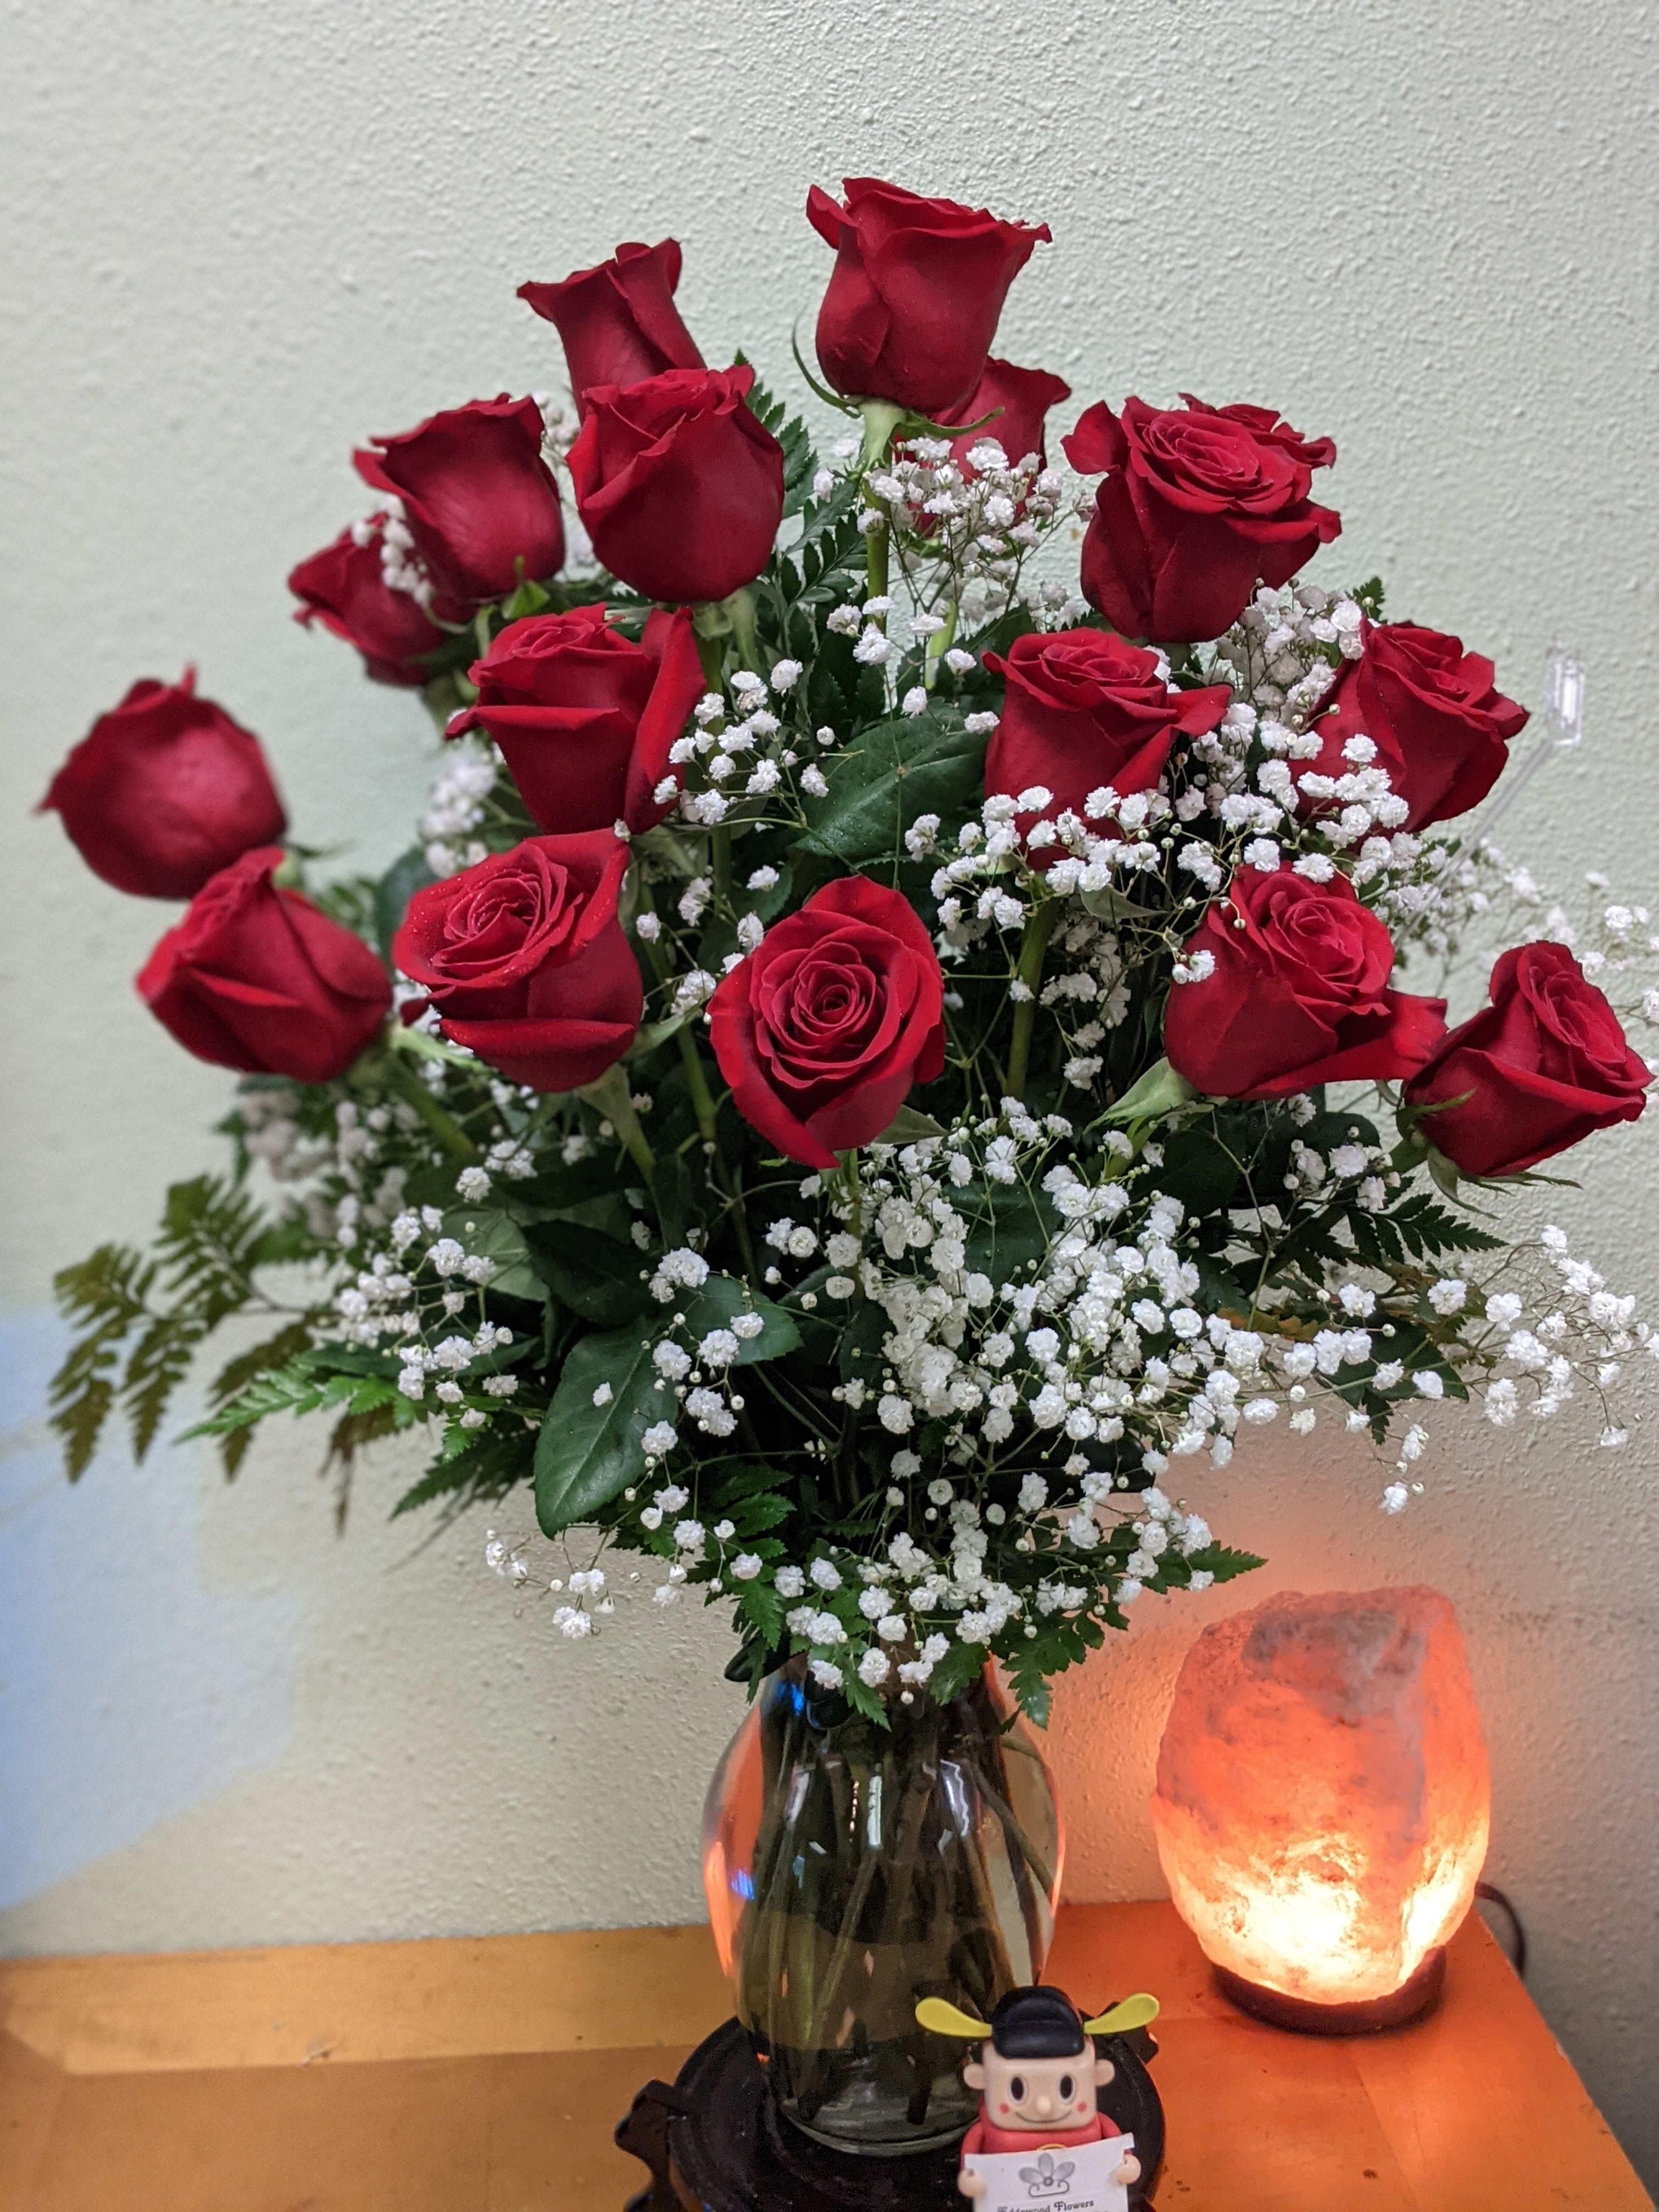 Lush Red Roses Bouquet  - Premium big-bloom 18-stem Red Roses bouquet styled elegantly in a clear vase with greenery and fillers.